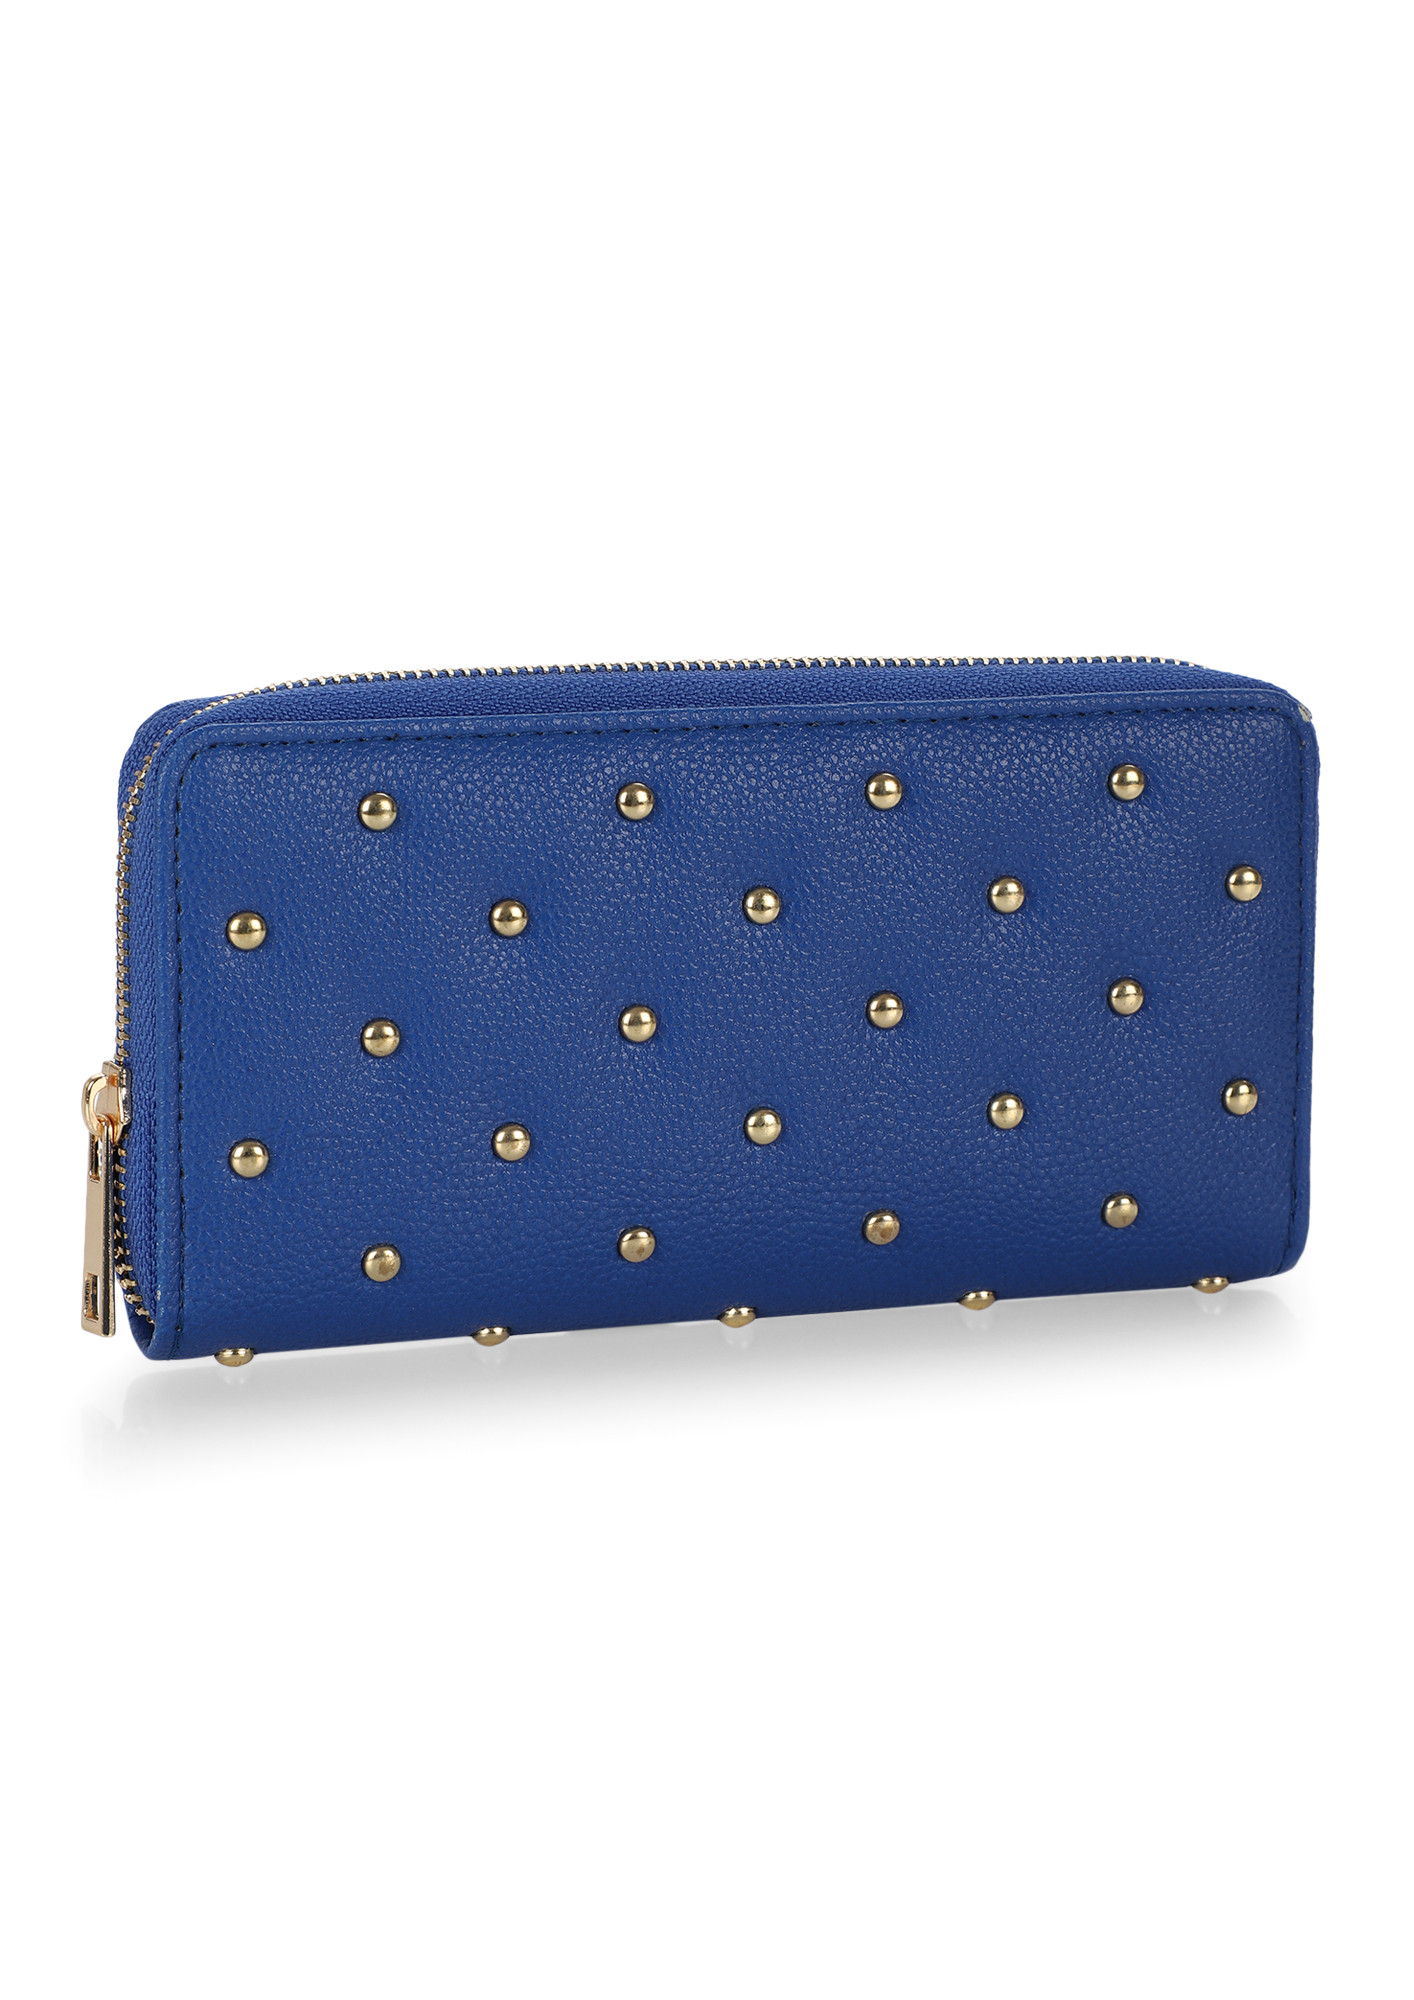 STUD OUT BABE BLUE WALLET